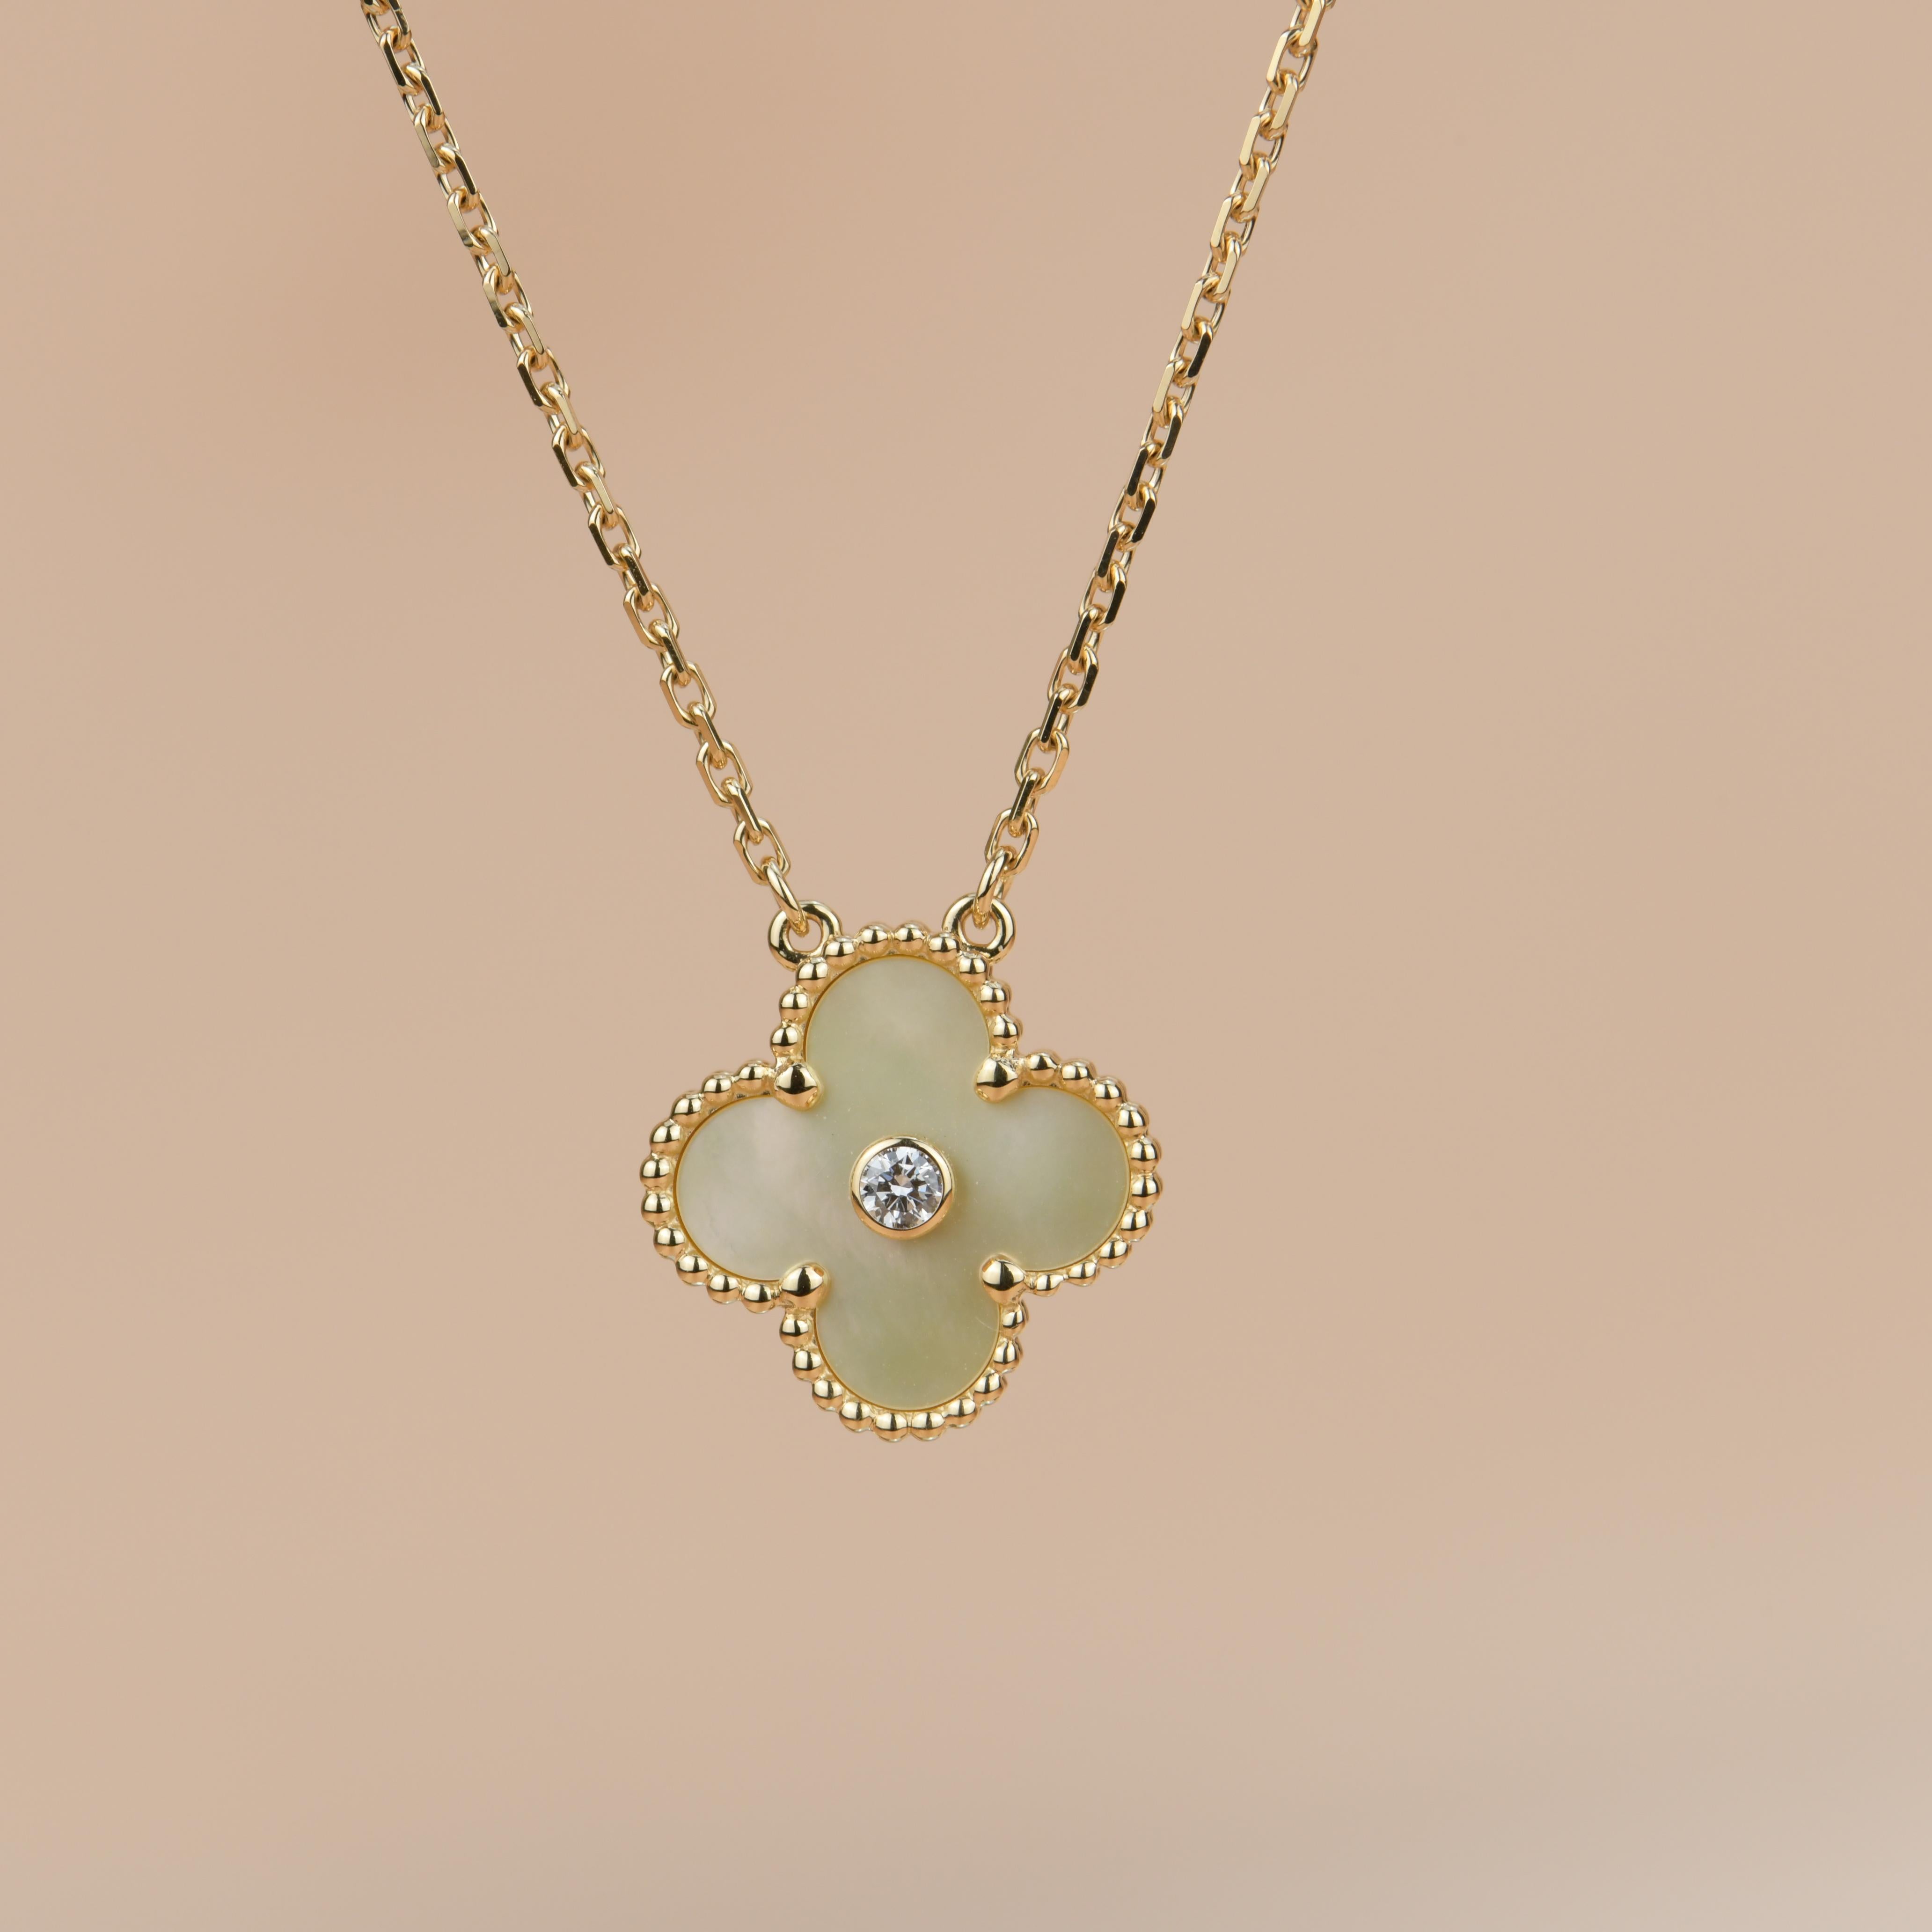 18K Gold Mother Of Pearl Alhambra Diamond Holiday Pendant Necklace was released in 2018 Christmas as the holiday pendant. 

Dandelion Antiques Code:  AT-1224
Brand:  Van Cleef & Arpels
Model:  ARP2R700
Date: 